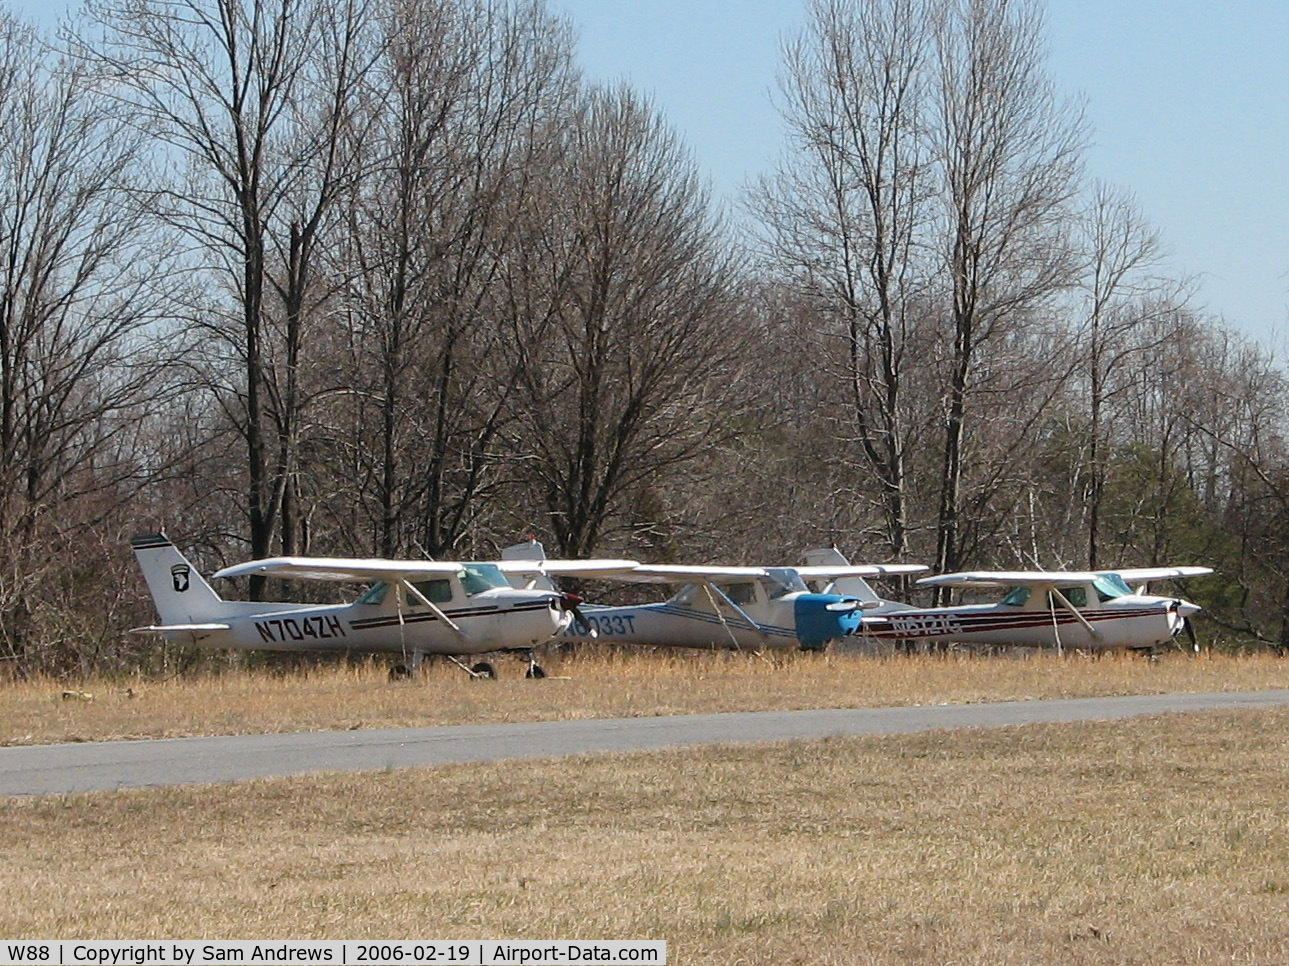 Air Harbor Airport (W88) - Flight line on North side of 27.